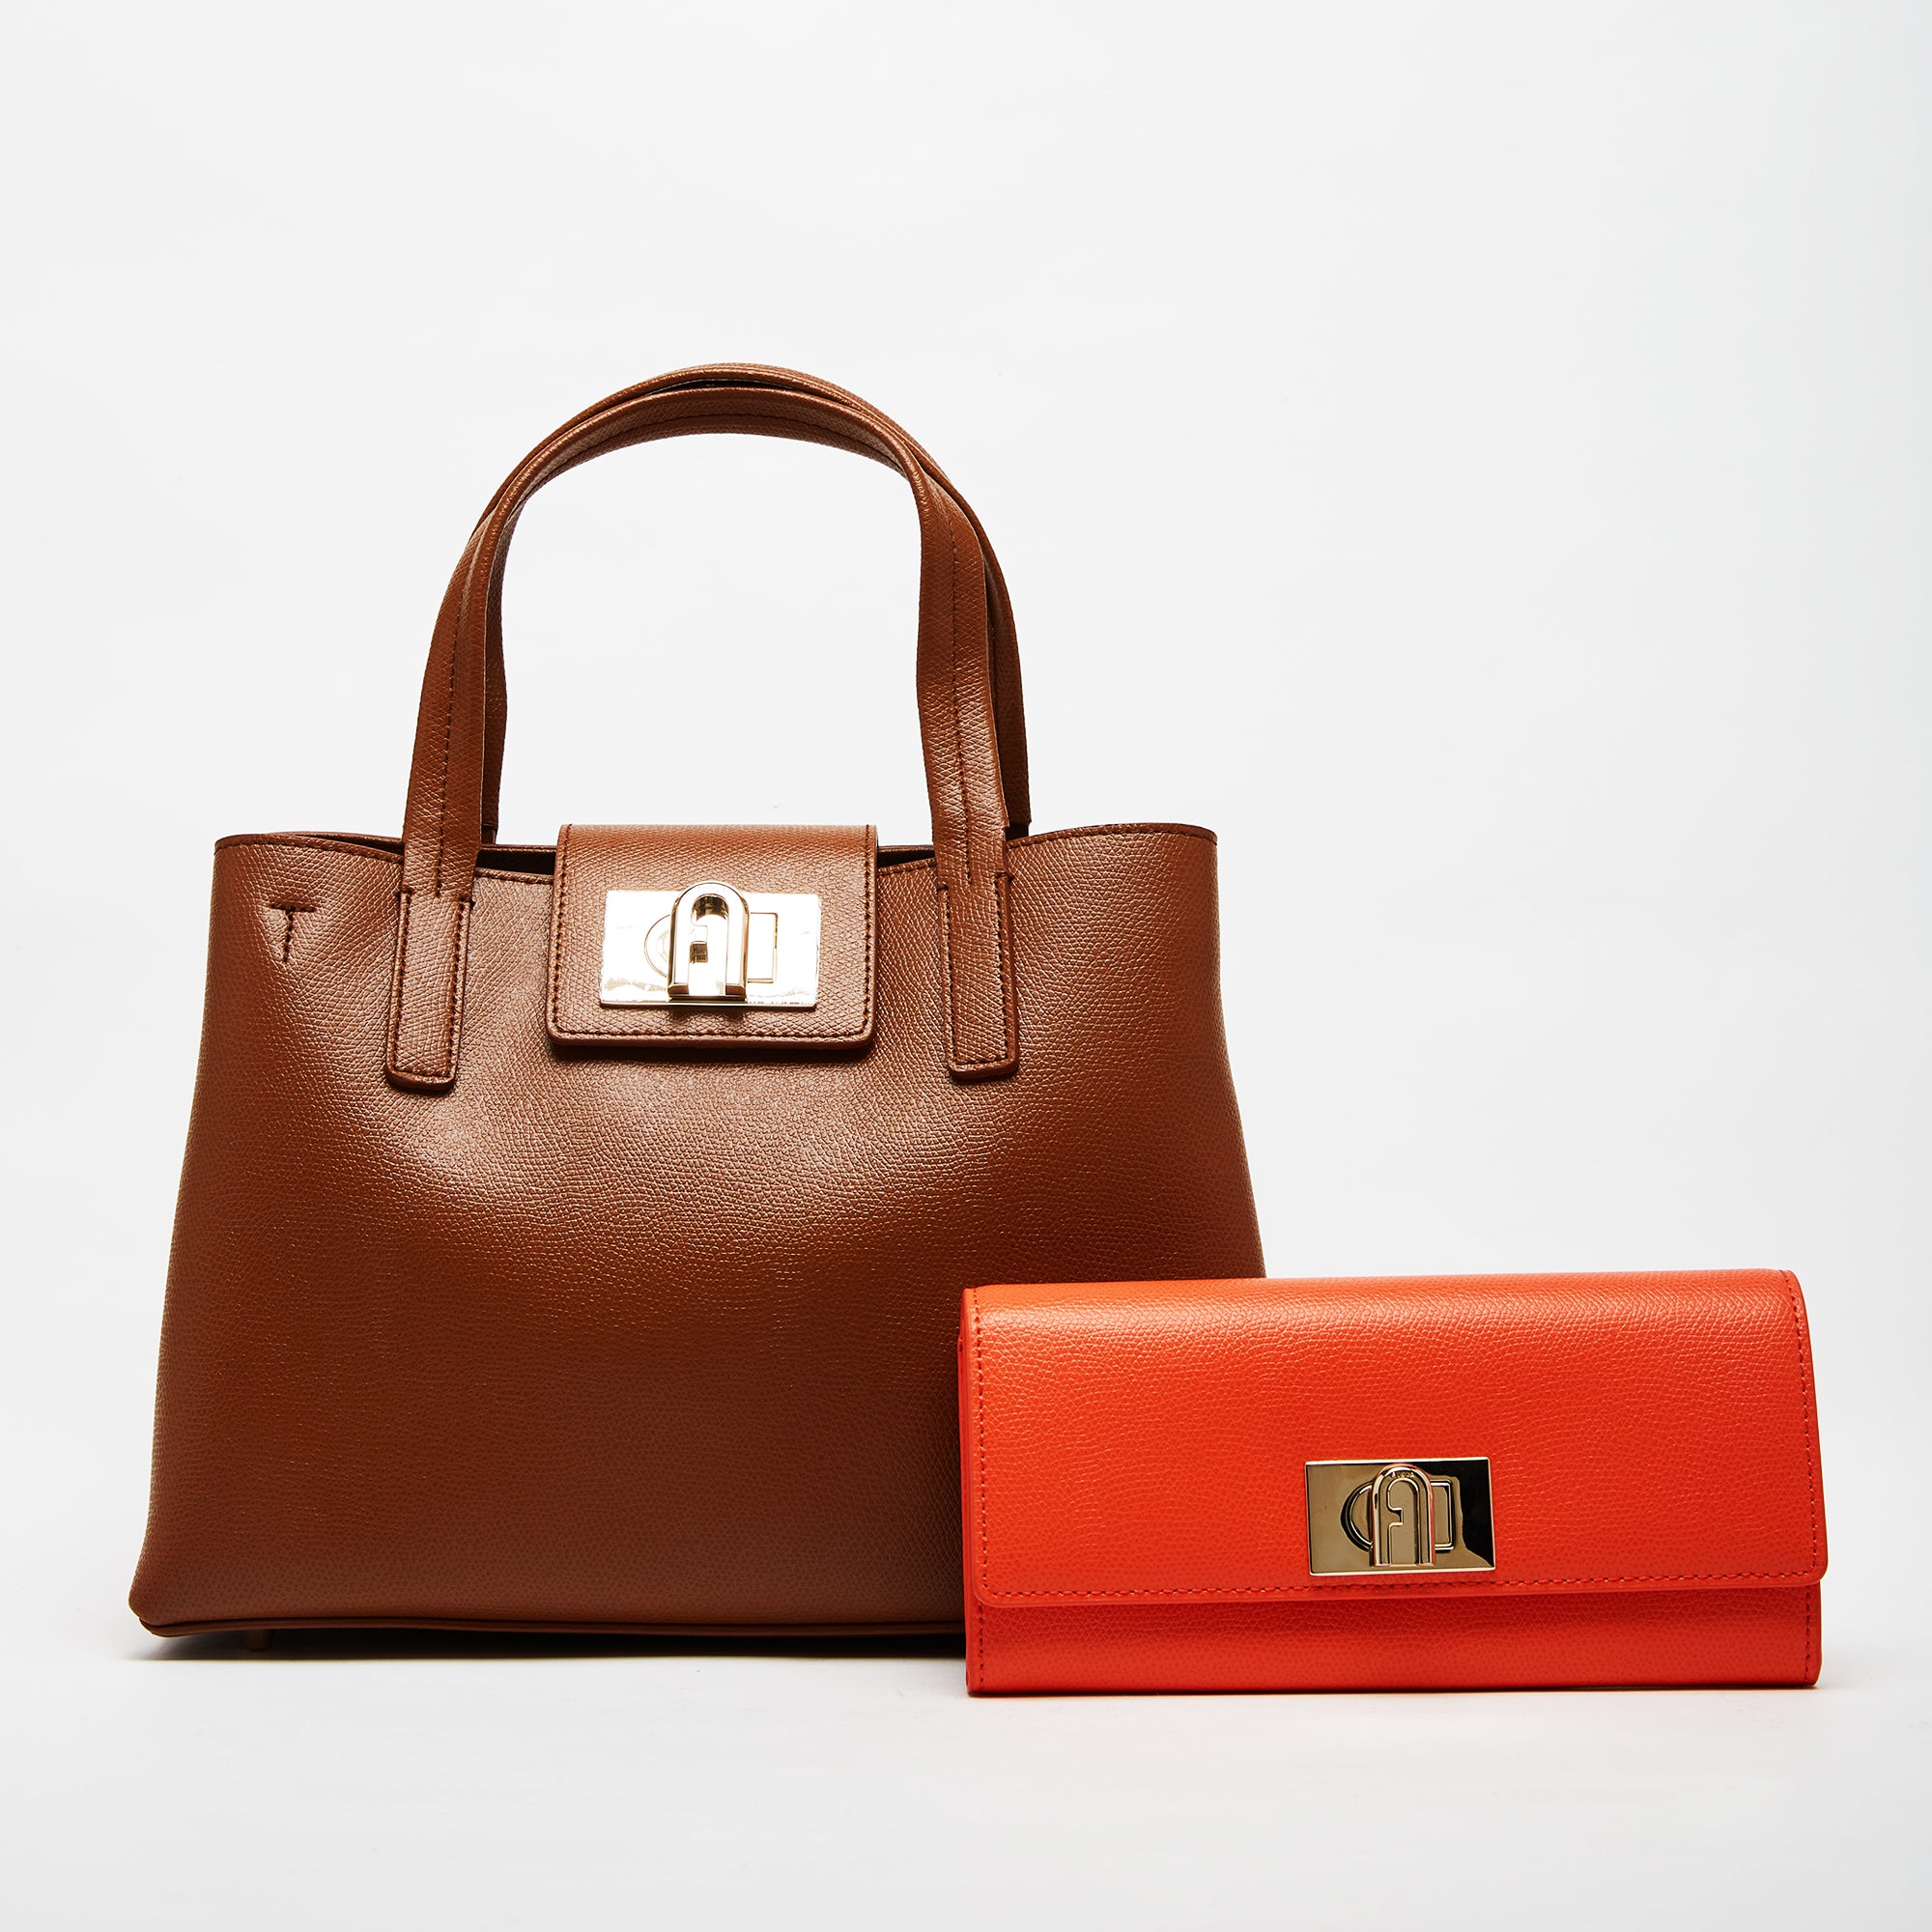 Furla 1927 Tote Bag with Continental Wallet Combo Cognac H Clivia M One Size